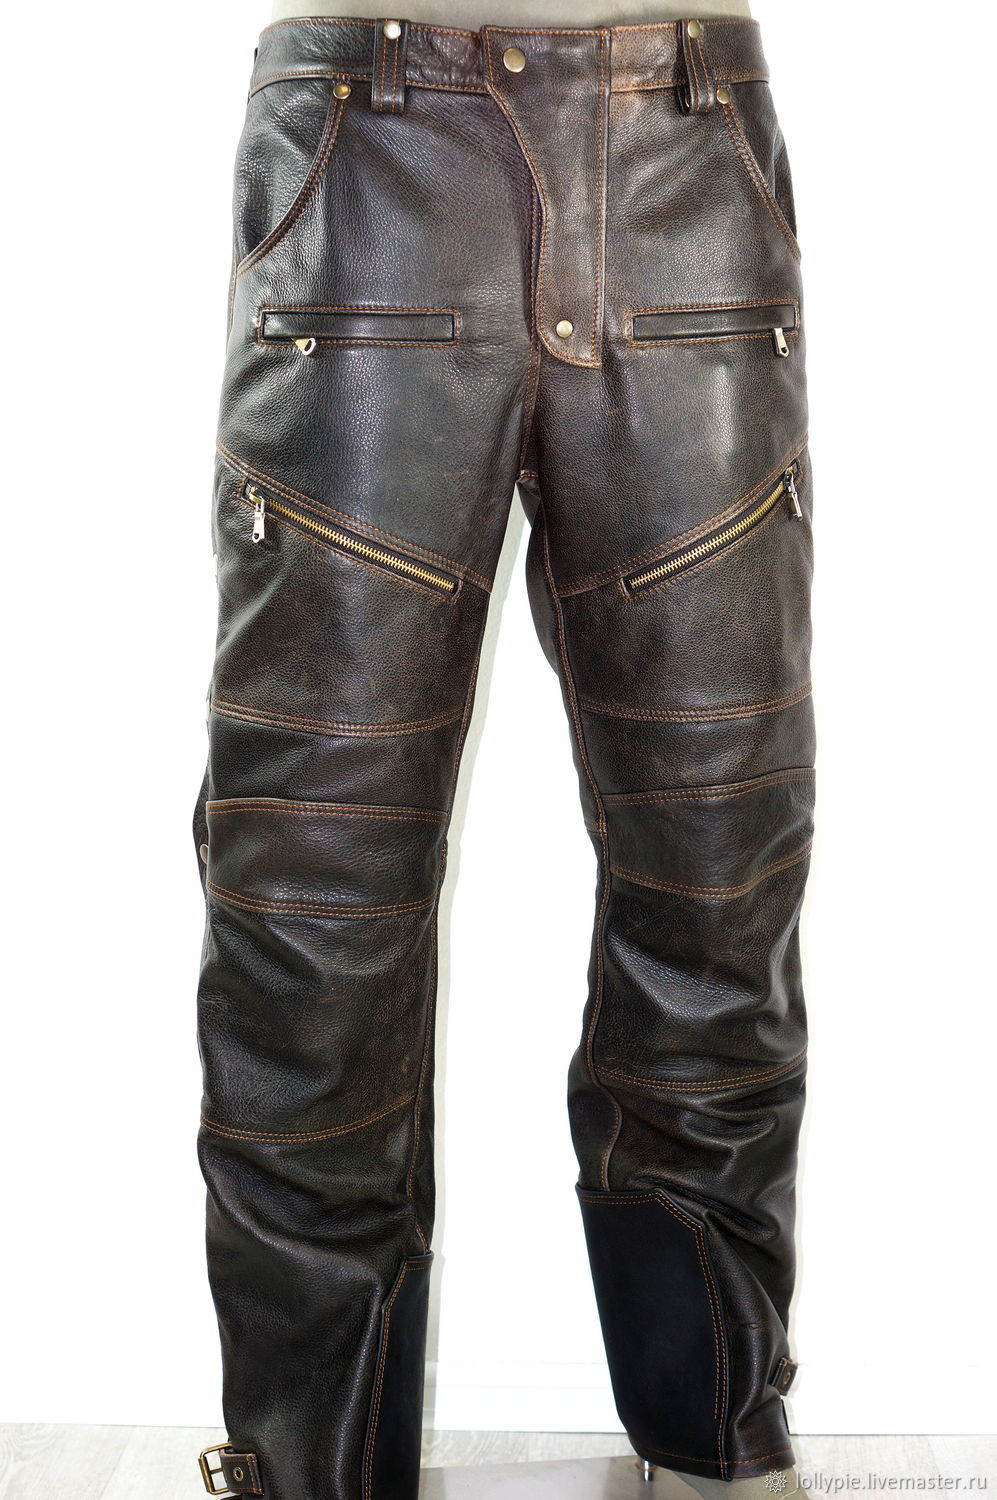 Biker Pants for Mens Faux Leather Pants Retro Stretch PU Motorcycle Pants  for Bikers Rider Moto Cargo Trouser Brown at Amazon Men's Clothing store